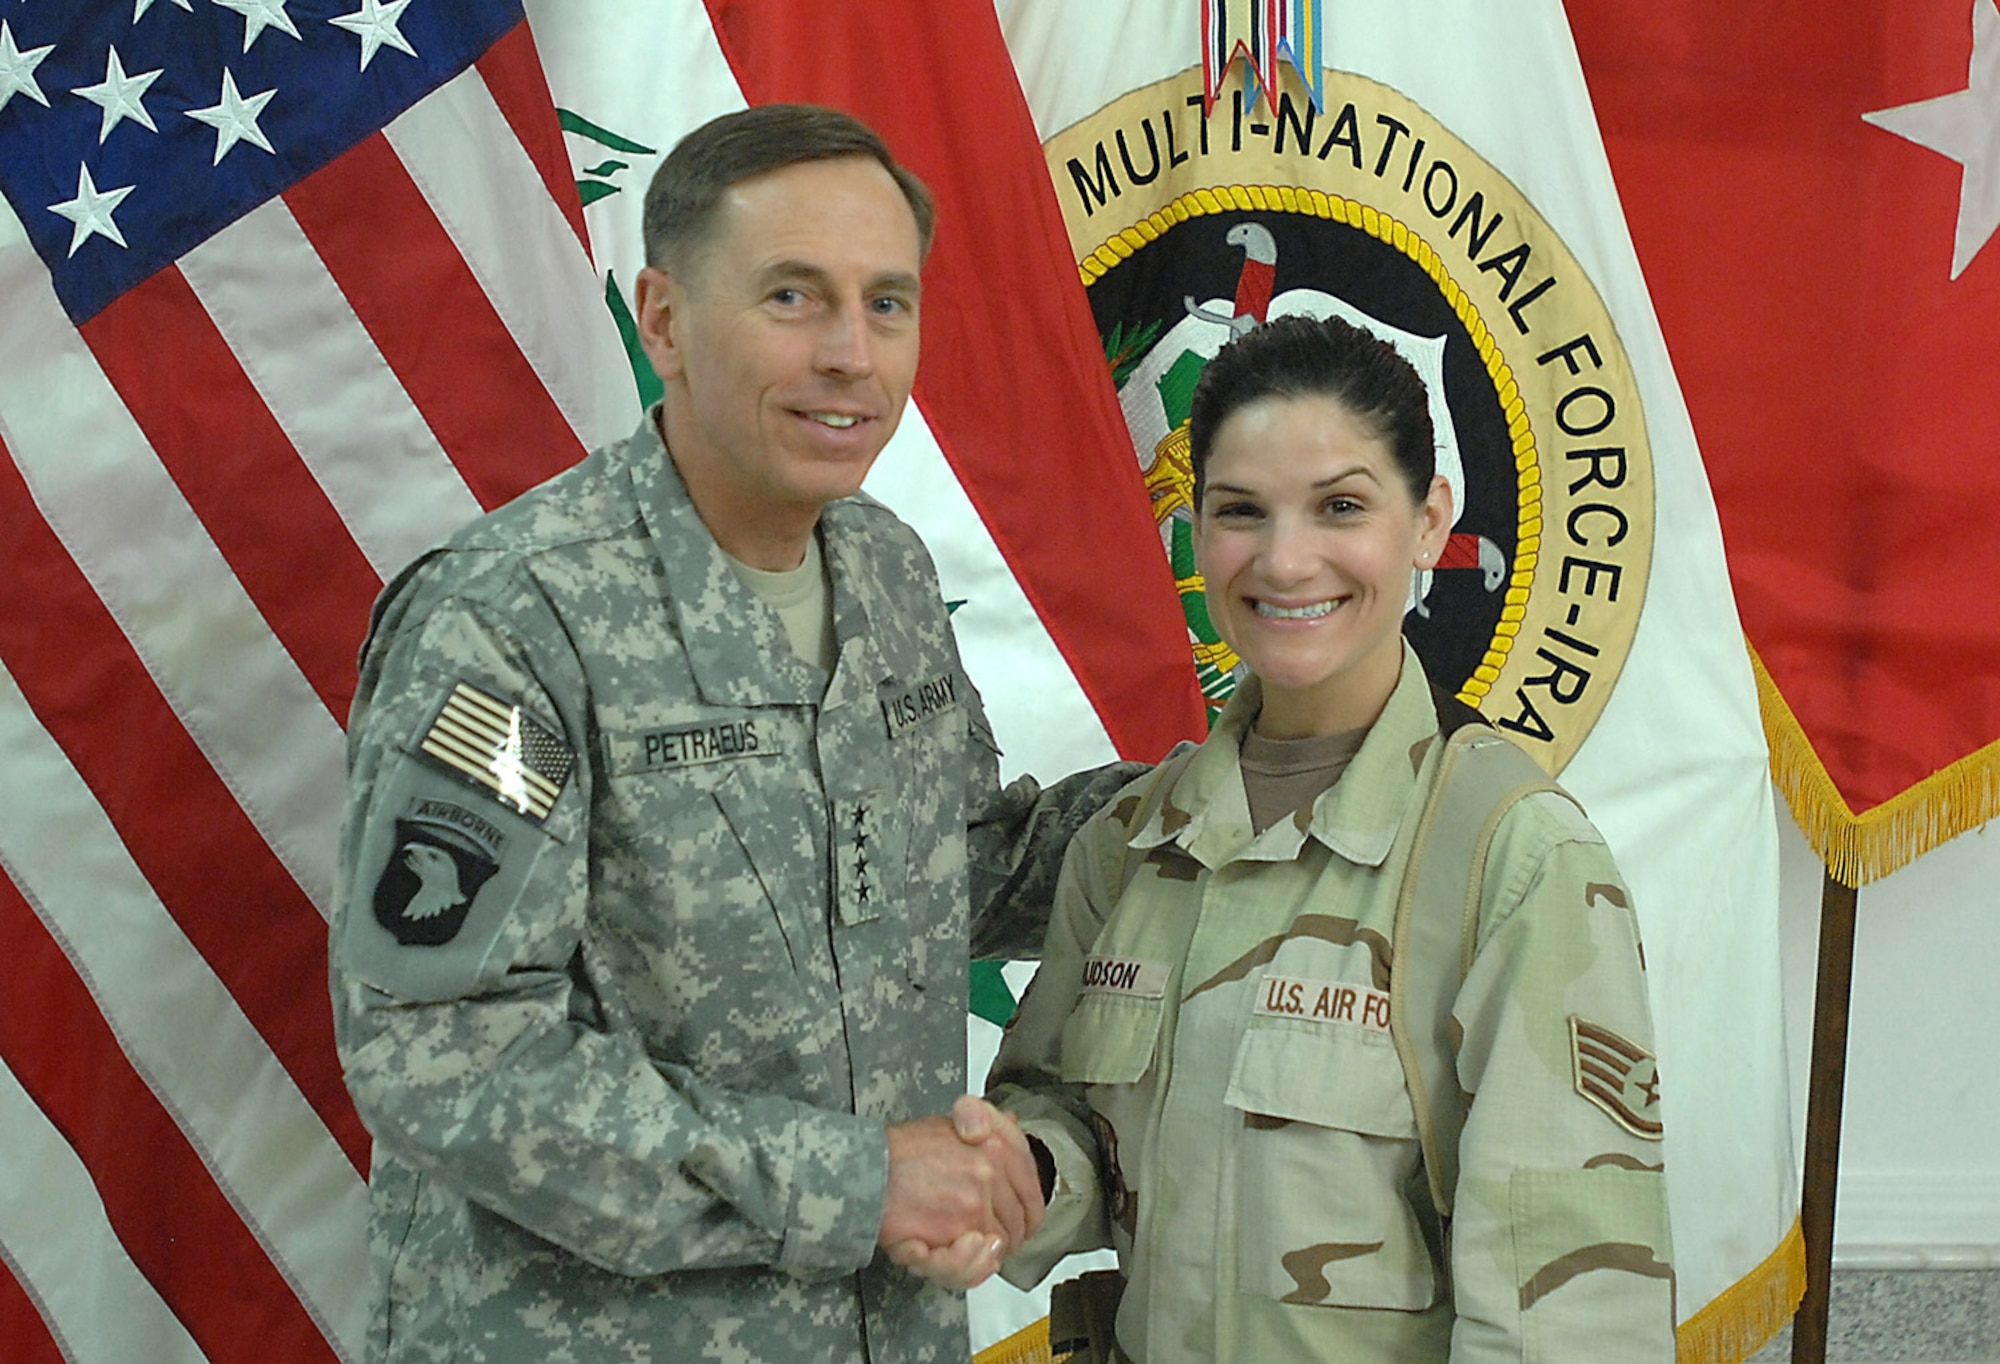 CAMP VICTORY, Iraq -- Gen. David H. Petraeus, Commanding General Multi-National Force - Iraq, shakes hands with Staff Sgt. Andrea Knudson Oct. 6, at the Al Faw Palace at Camp Victory in Baghdad, Iraq. Sergeant Knudson is a public affairs specialist assigned to the Joint Operations Center with Multi-National Corps Iraq. Her home duty station is Spangdahlem Air Base, Germany. (Photo courtesy of the U.S. Army).  
